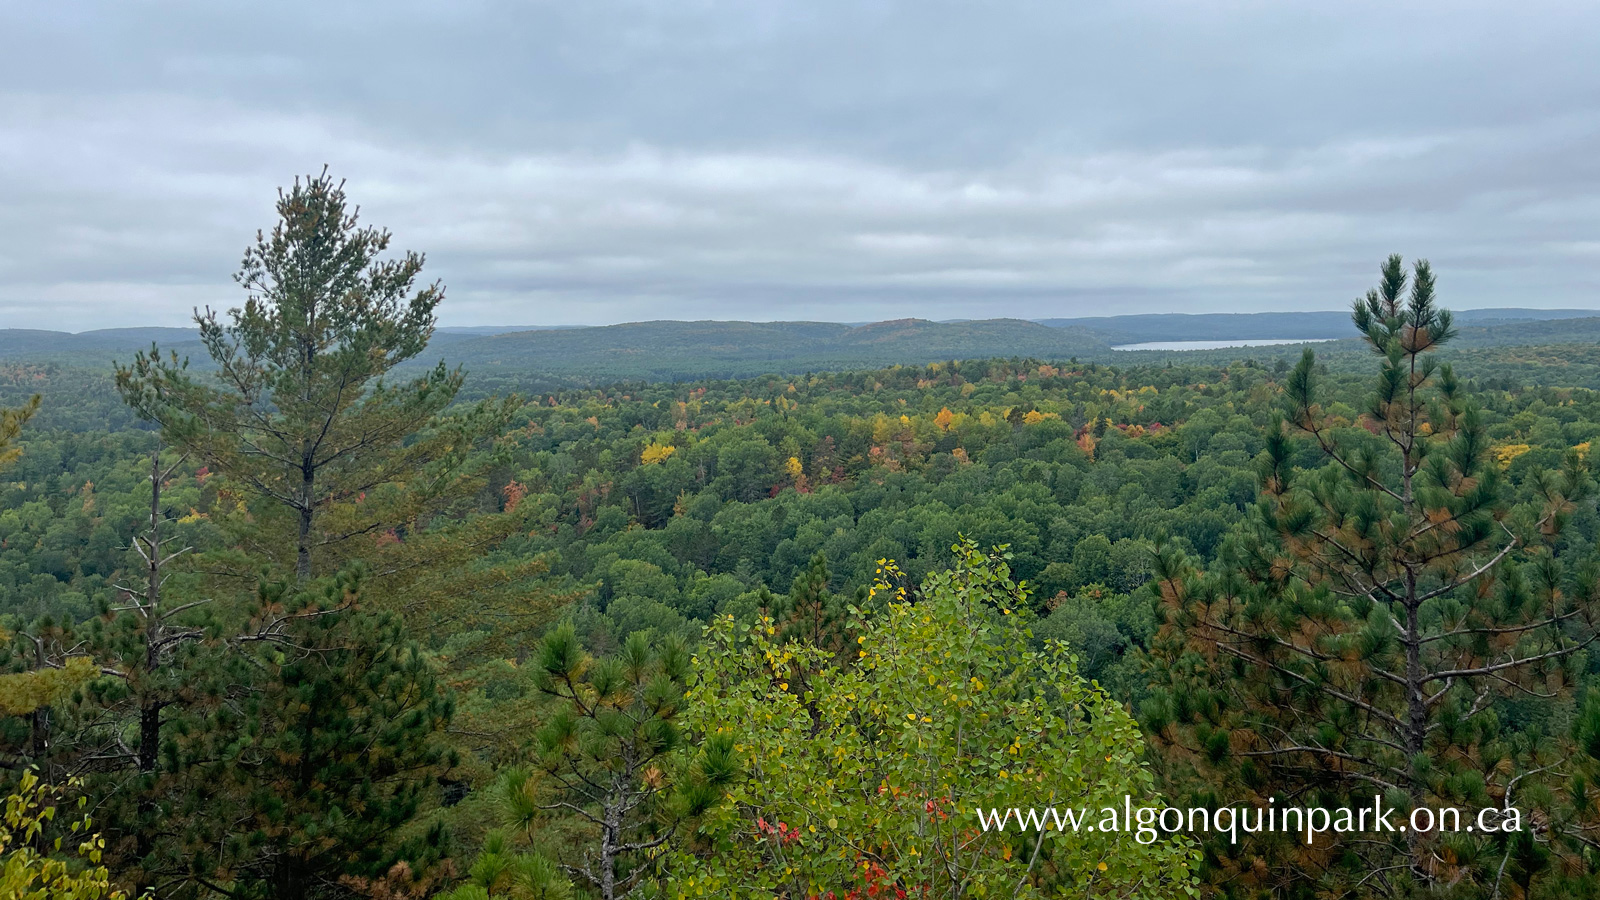 View at the Lookout Trail in Algonquin Park on September 17, 2022.